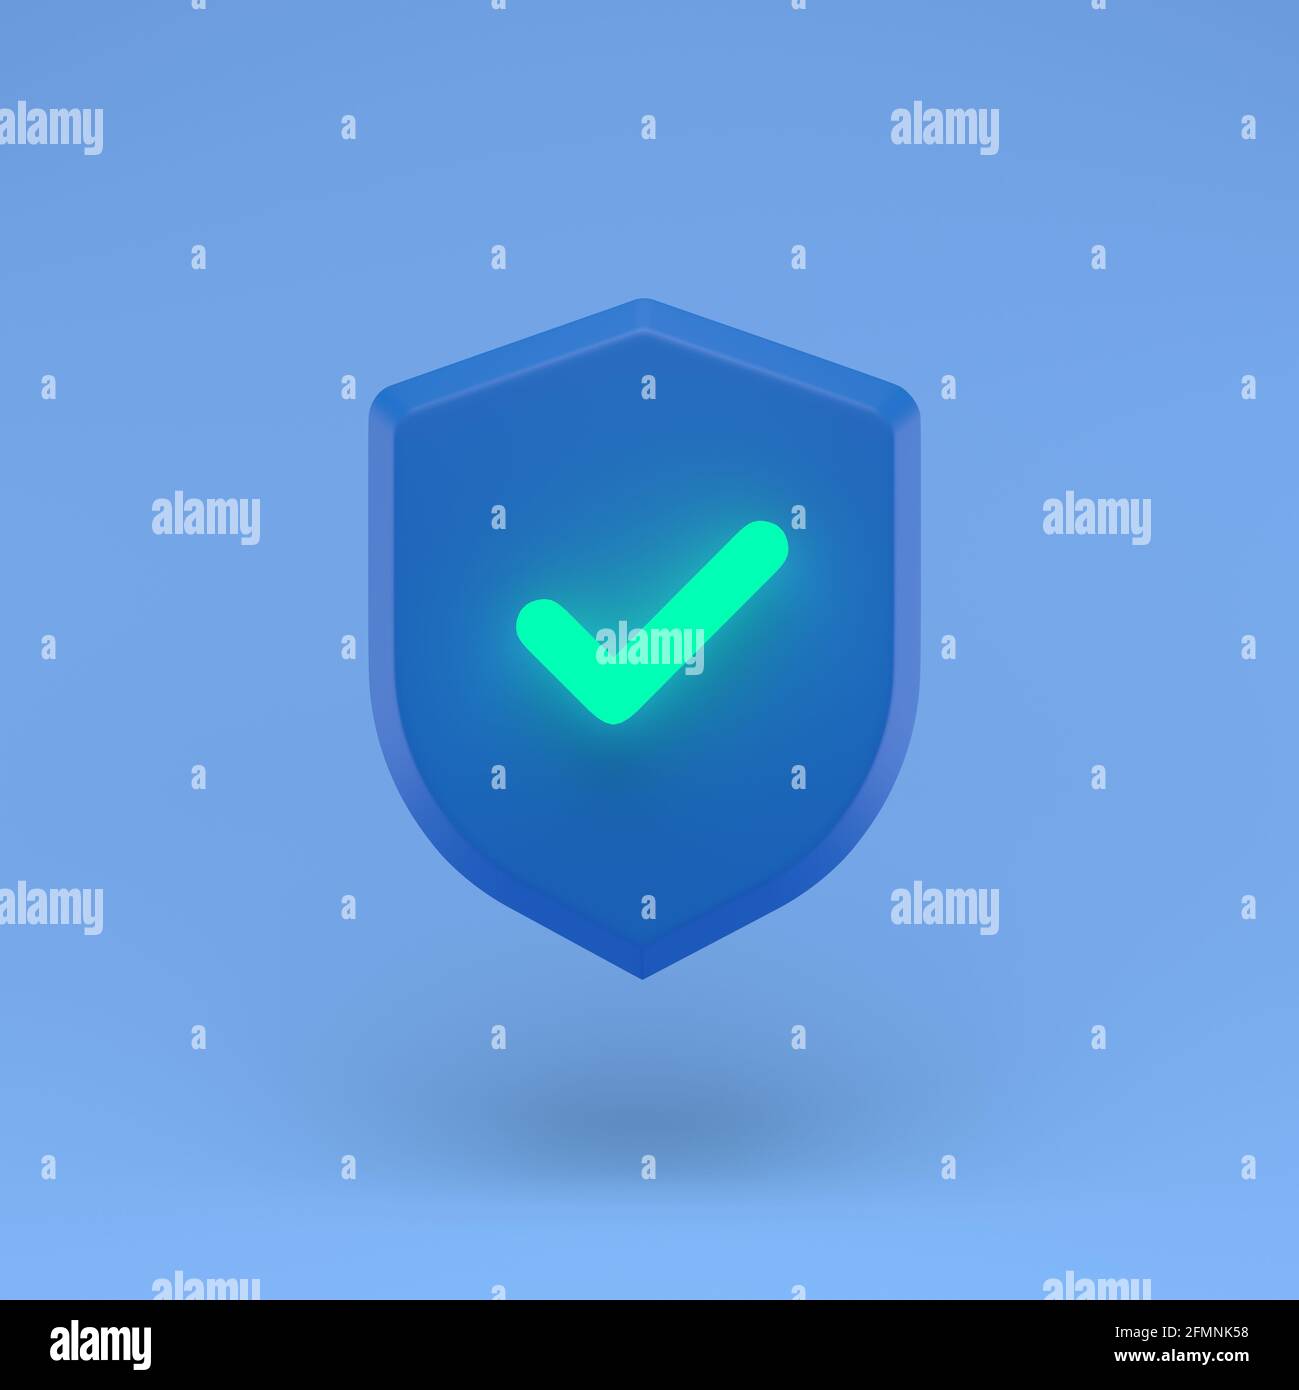 Shield protected icon with grow check simple 3d illustration on pastel abstract background. minimal concept. Stock Photo